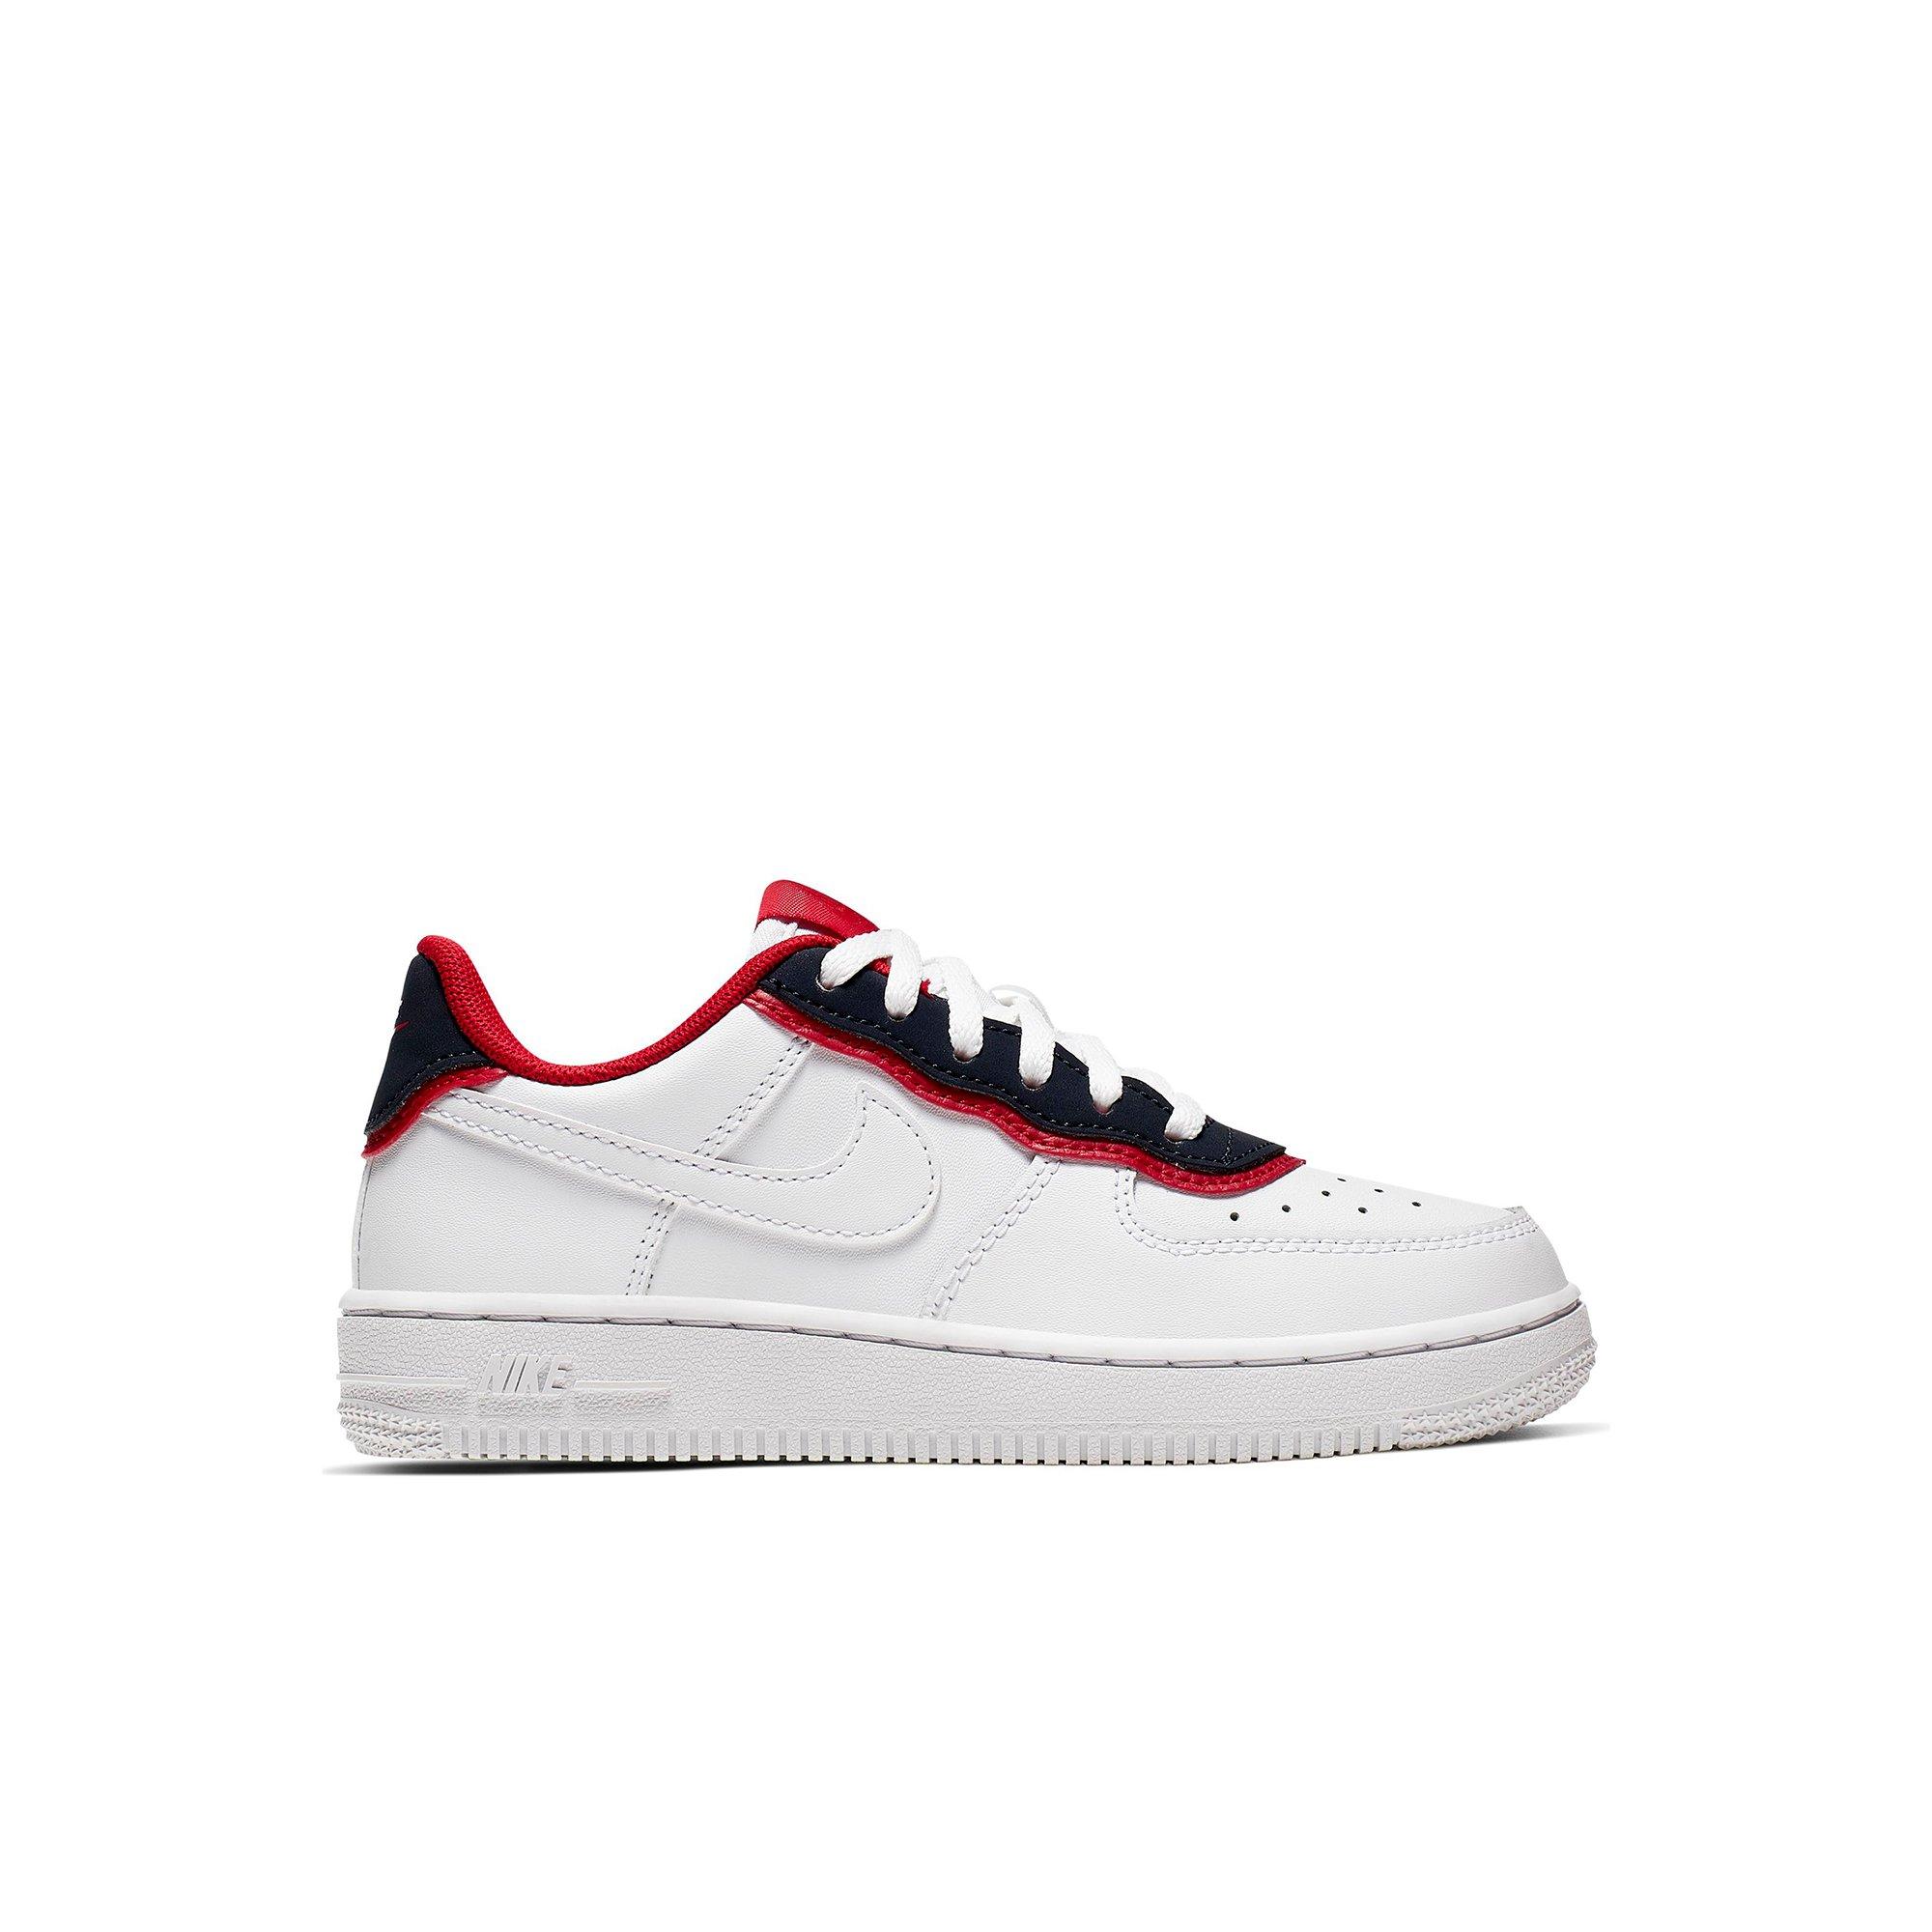 red and white air force 1 preschool